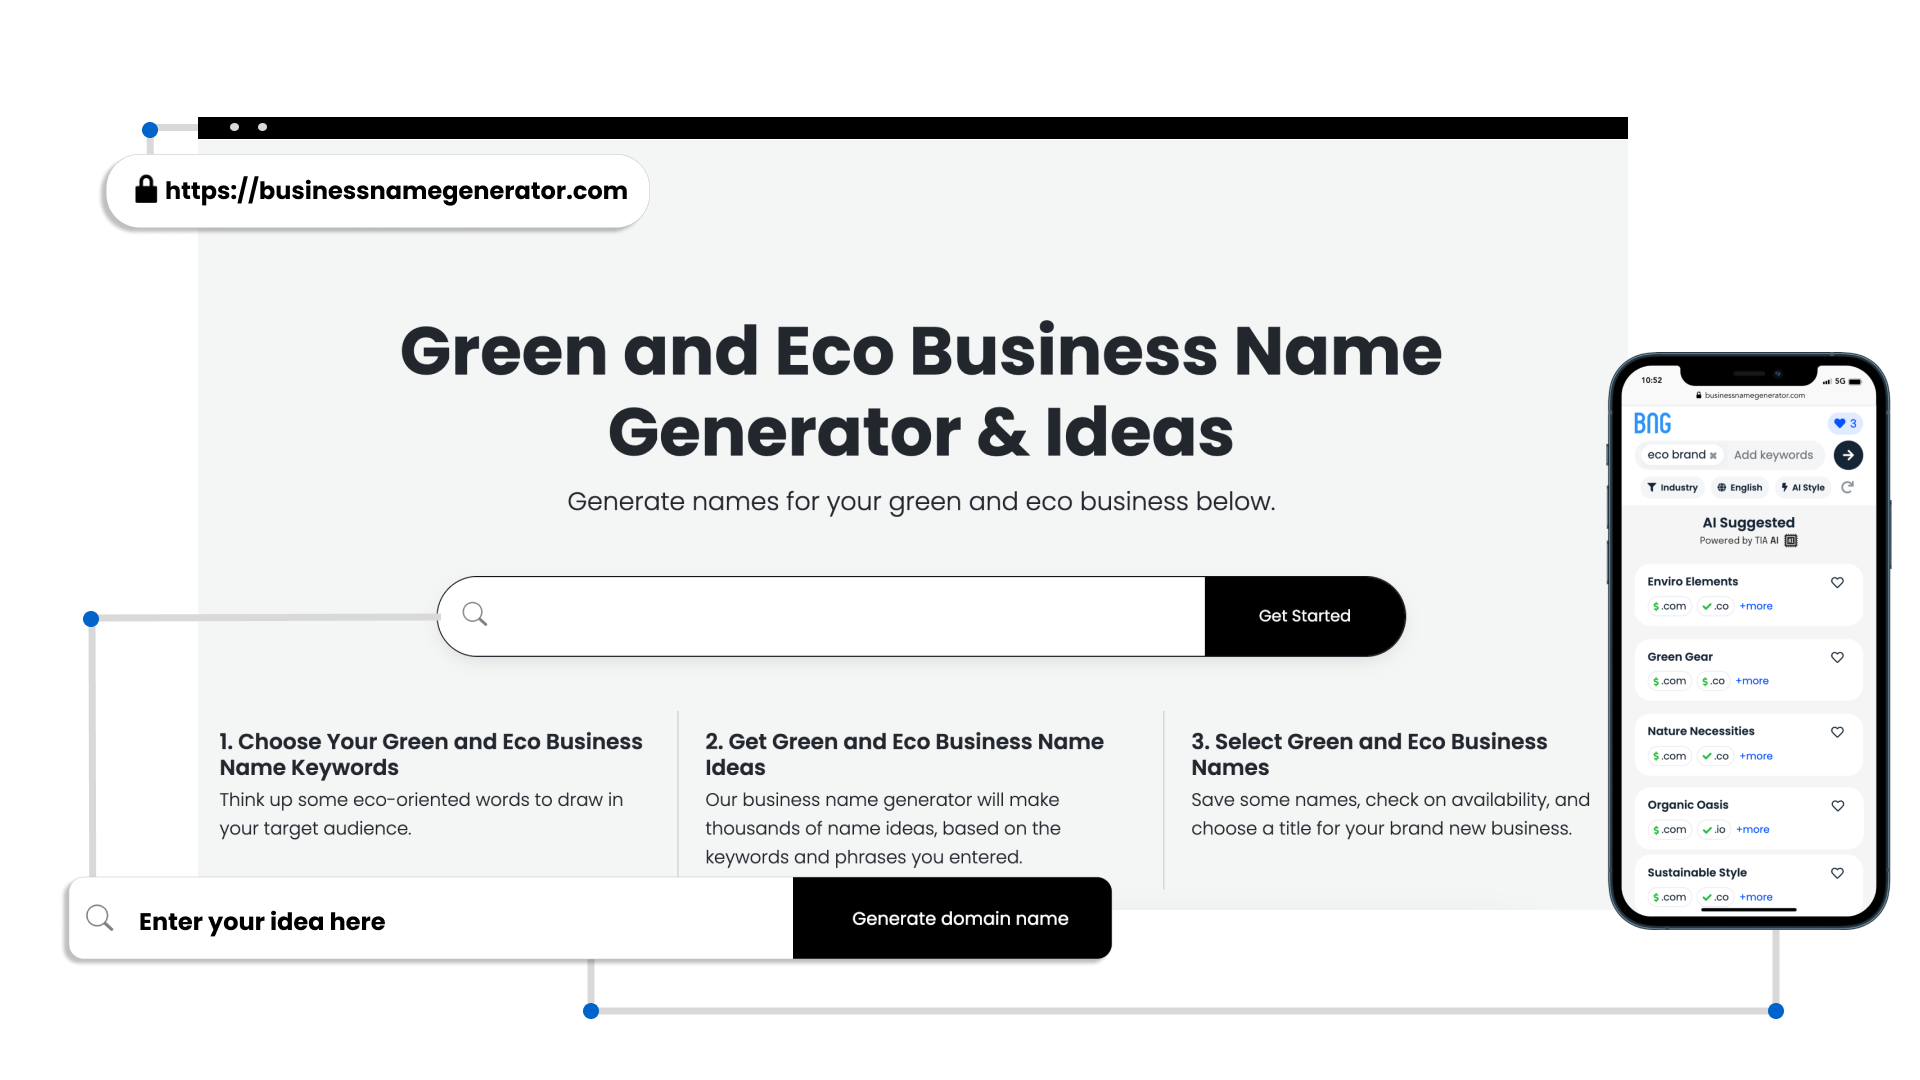 Benefits of Our Green and Eco Business Name Generator
